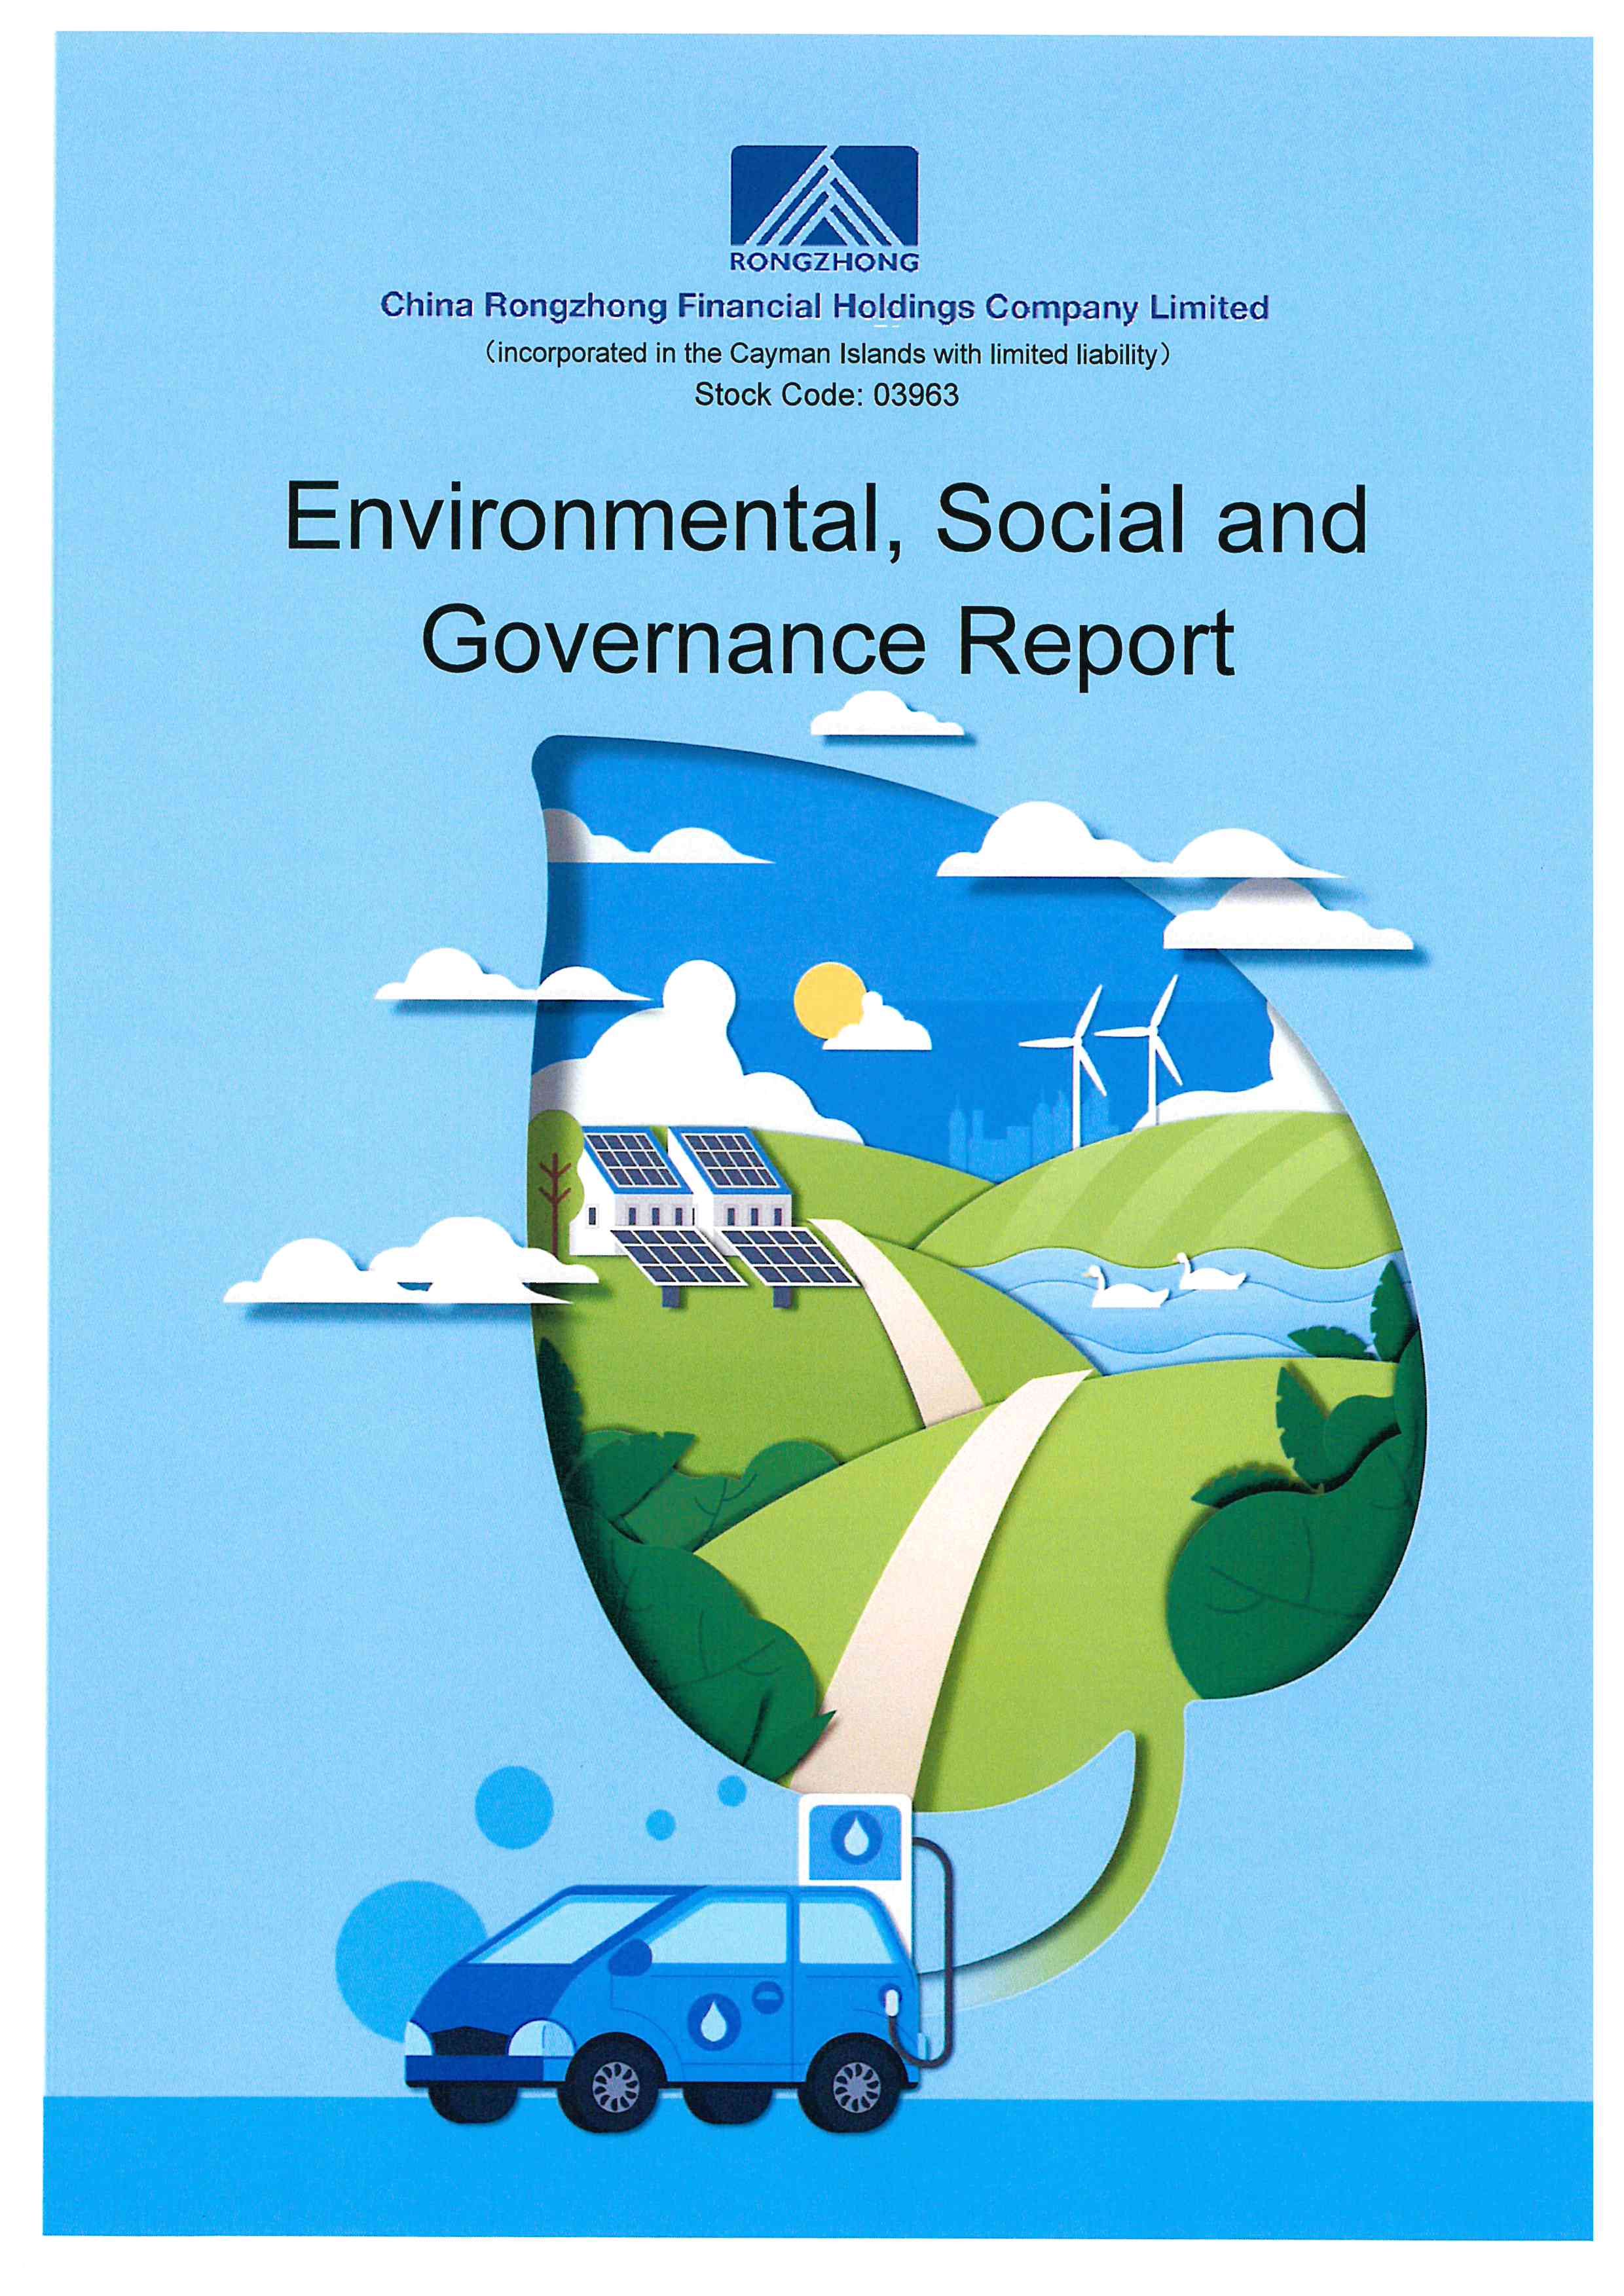 Financial Statements/ESG Information - [Environmental, Social and Governance Information/Report]